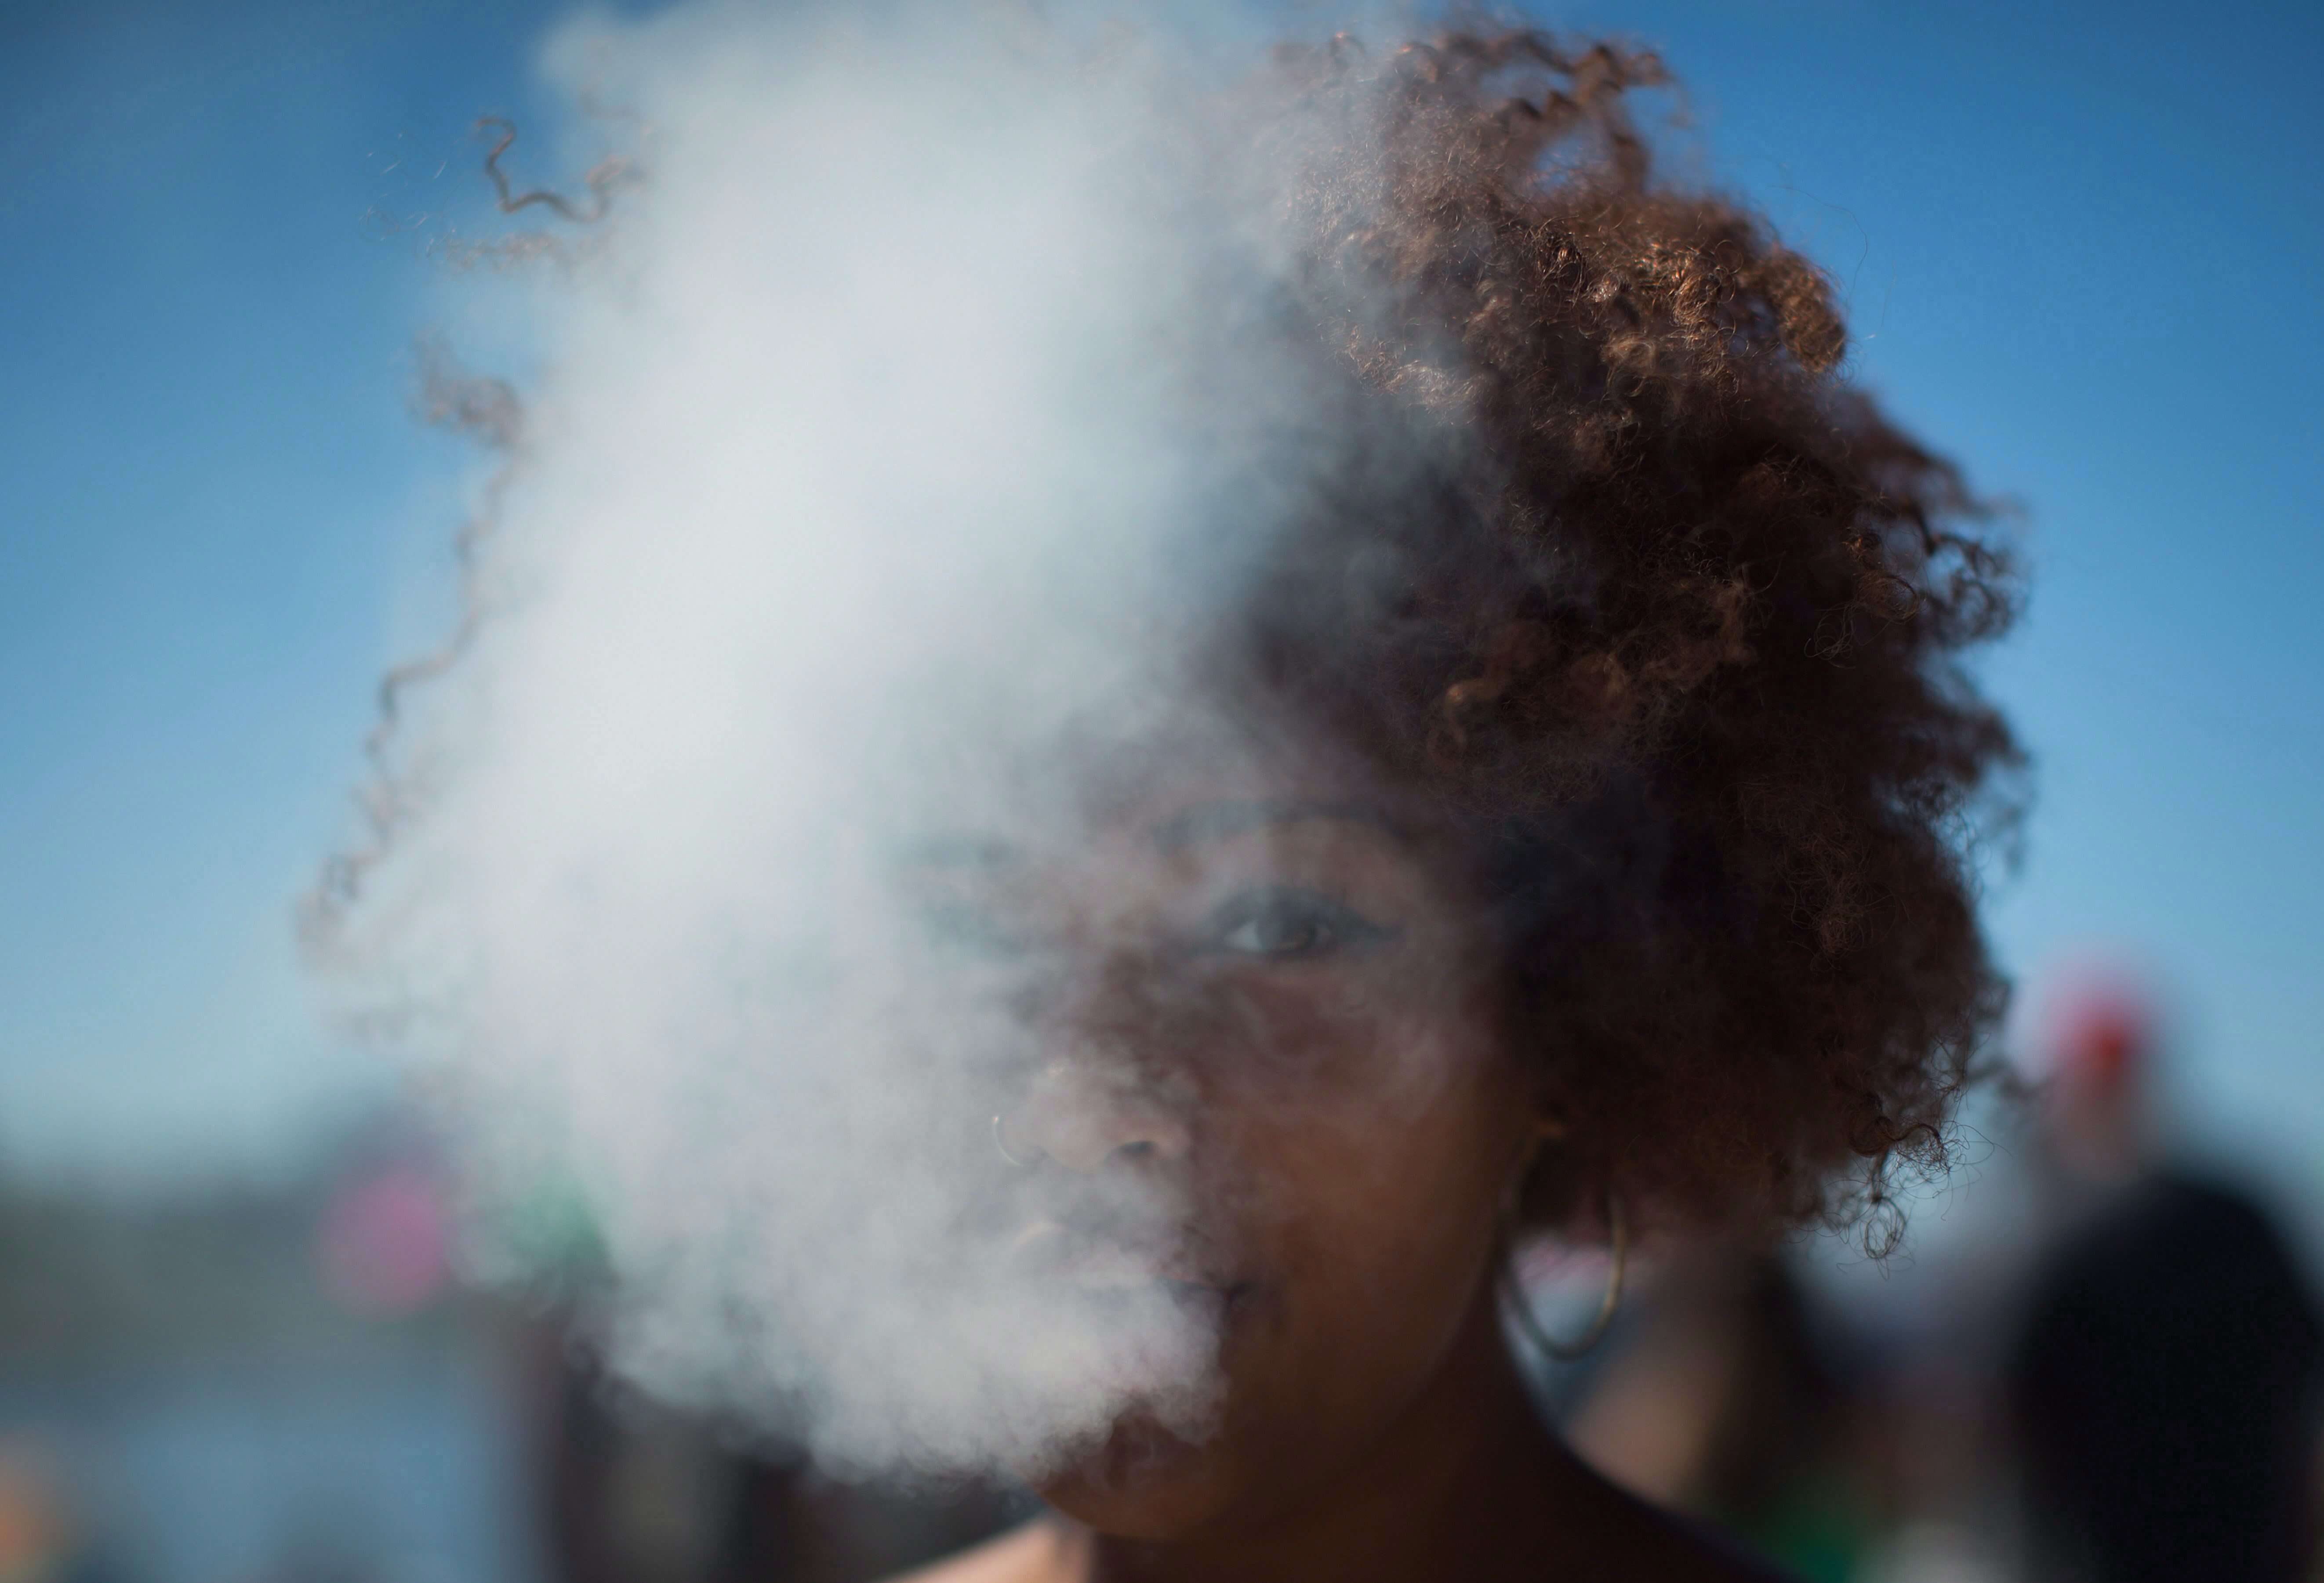 A woman exhales smoke after taking a hit from a bong.